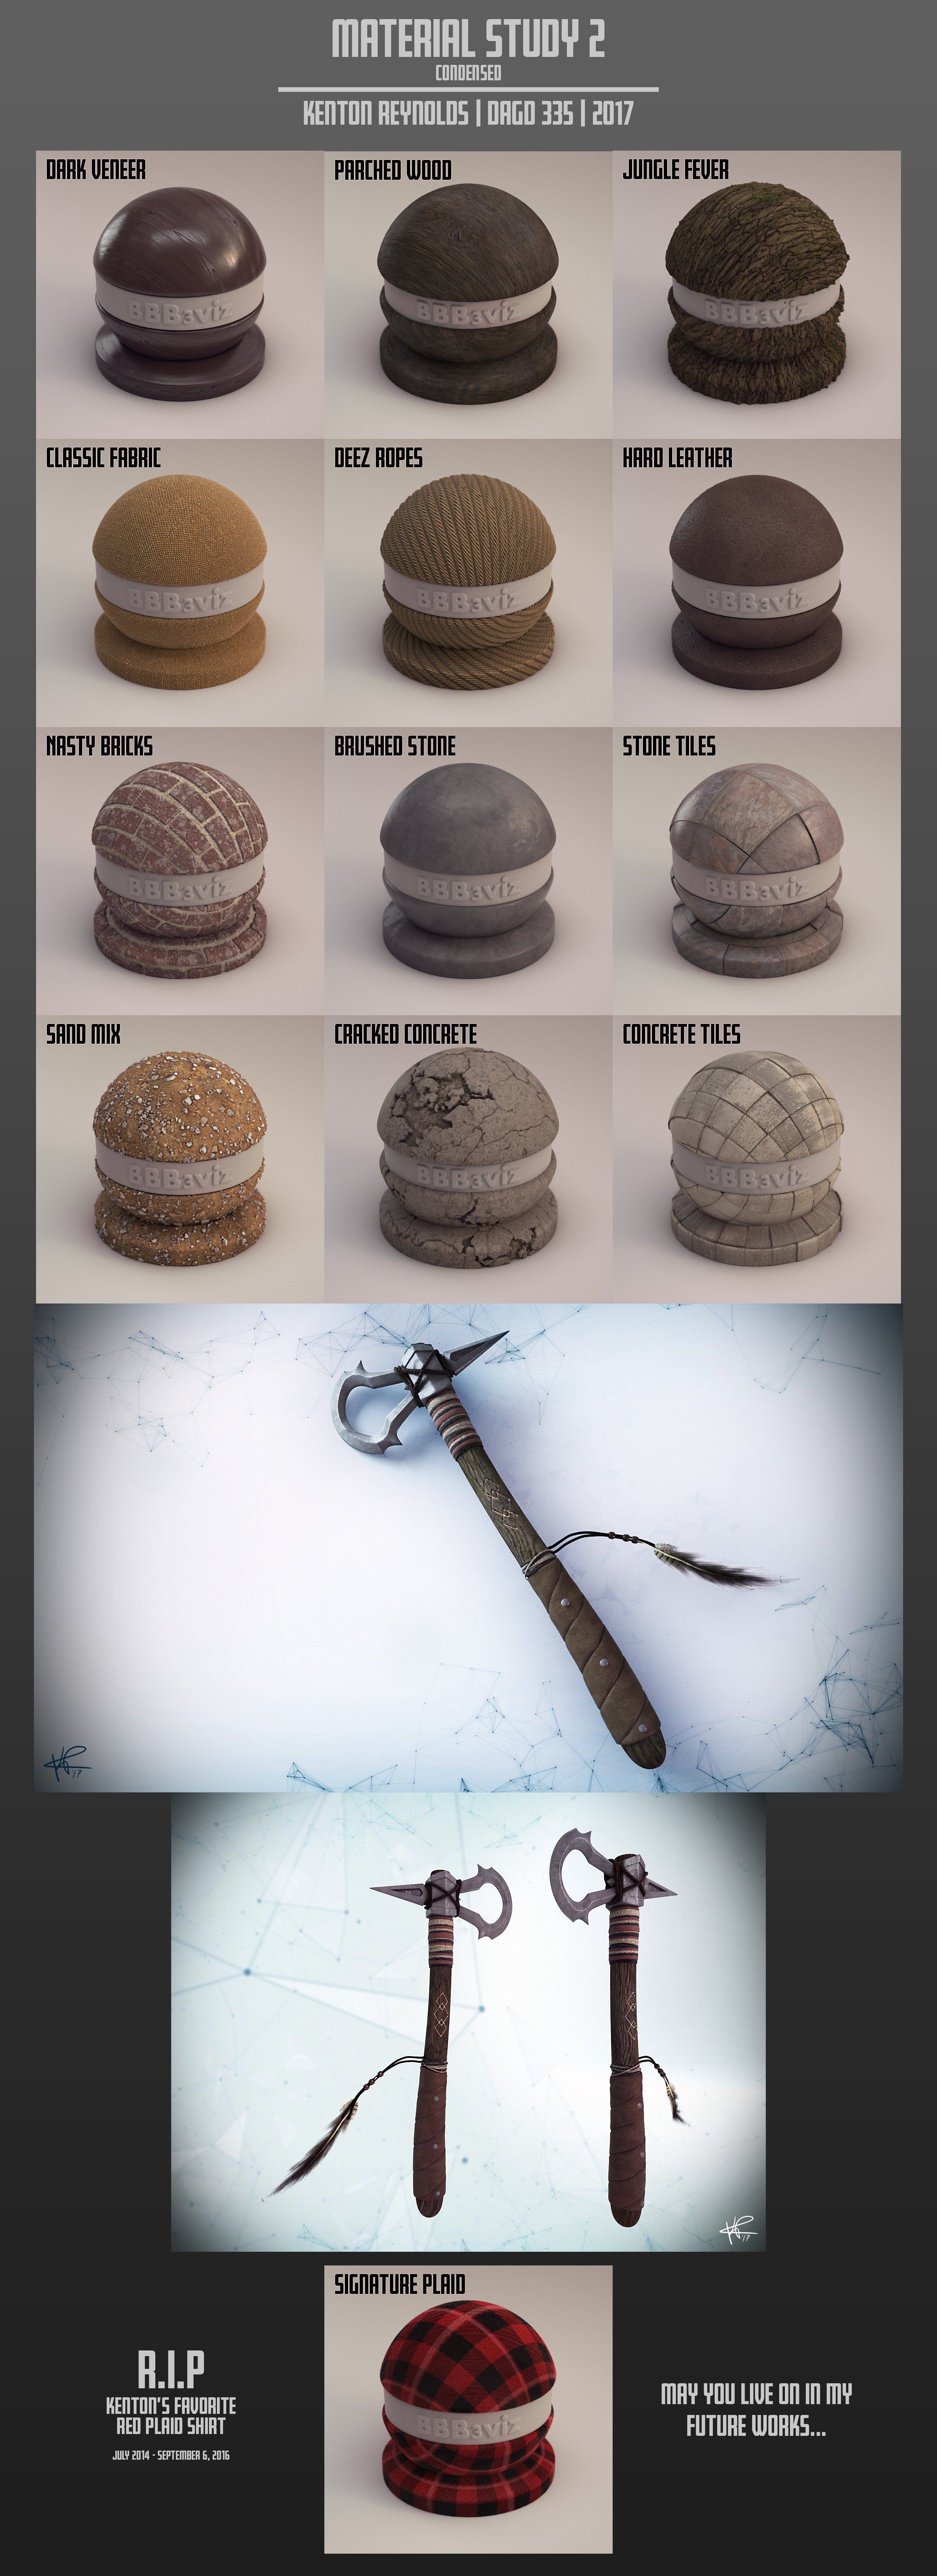 For this study, I made wood, fabric, stone, brick, and concrete materials. I created Conner's tomahawk from Assassin's Creed 3 to showcase a few of these materials.